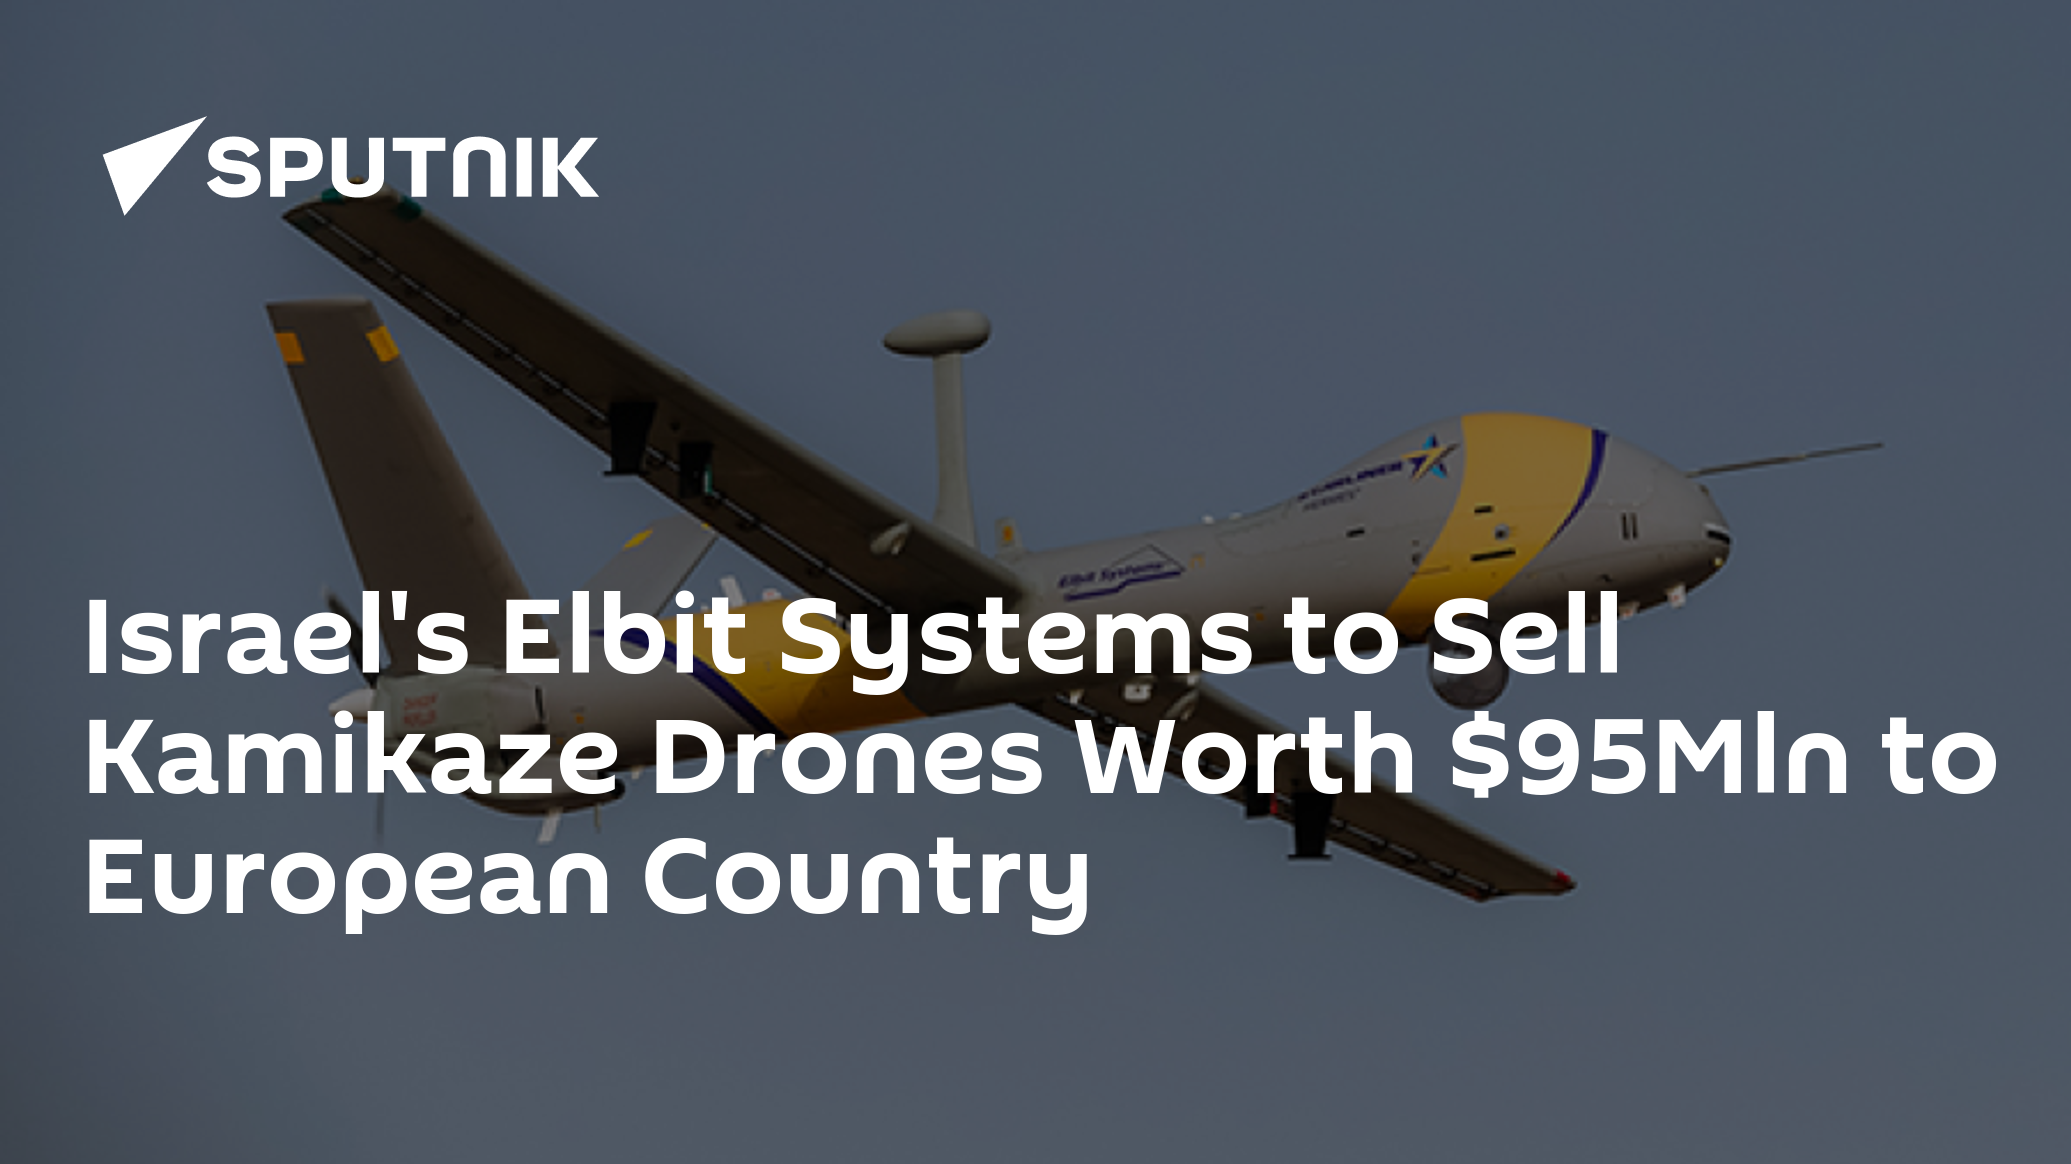 Israel's Elbit Systems to Sell Kamikaze Drones Worth Mln to European Country